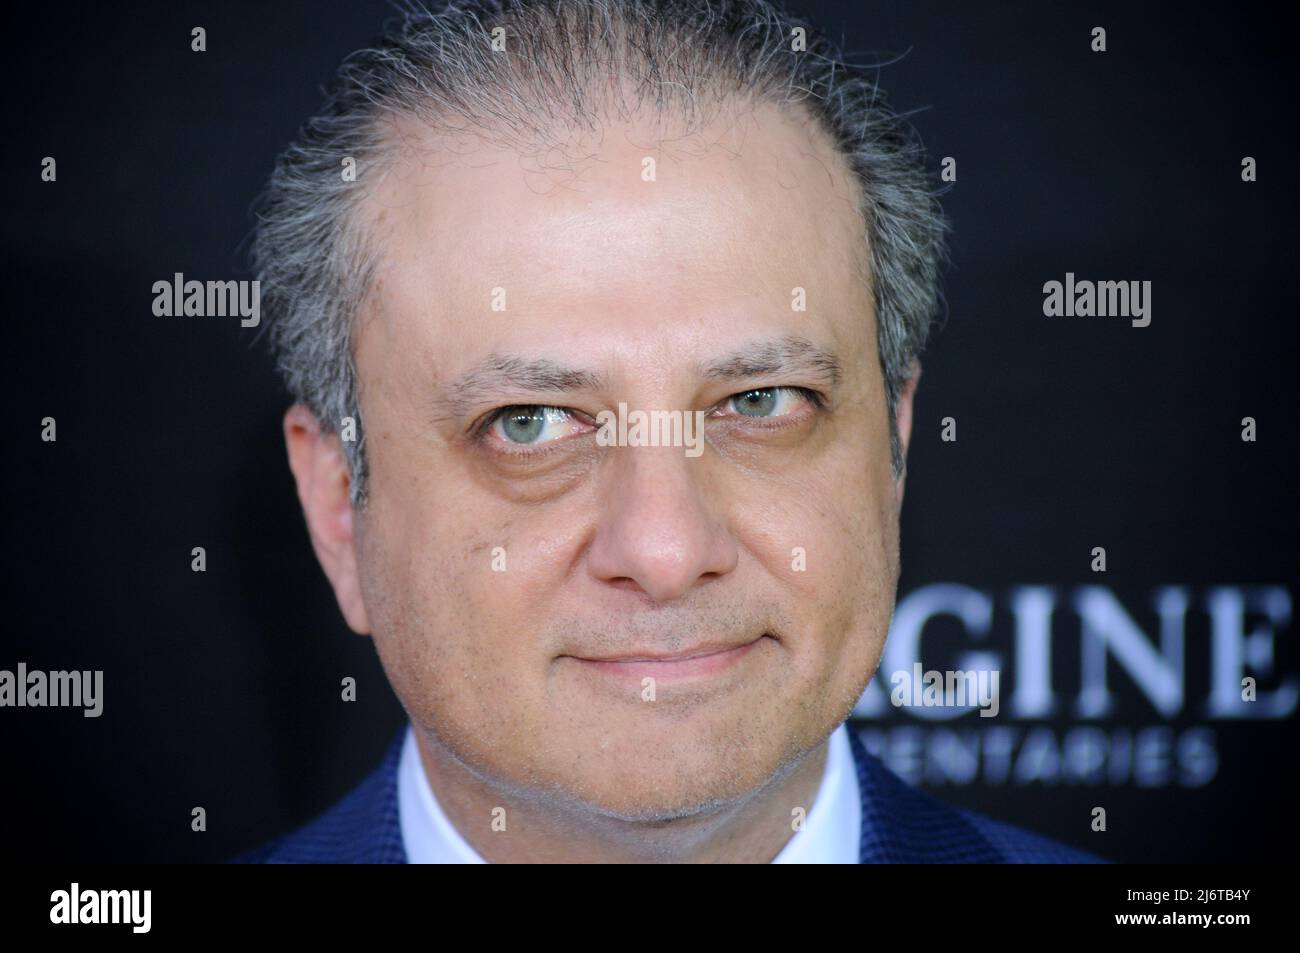 Preet Bharara attends the 'We Feed People' screening at the SVA Theater in New York City. Stock Photo